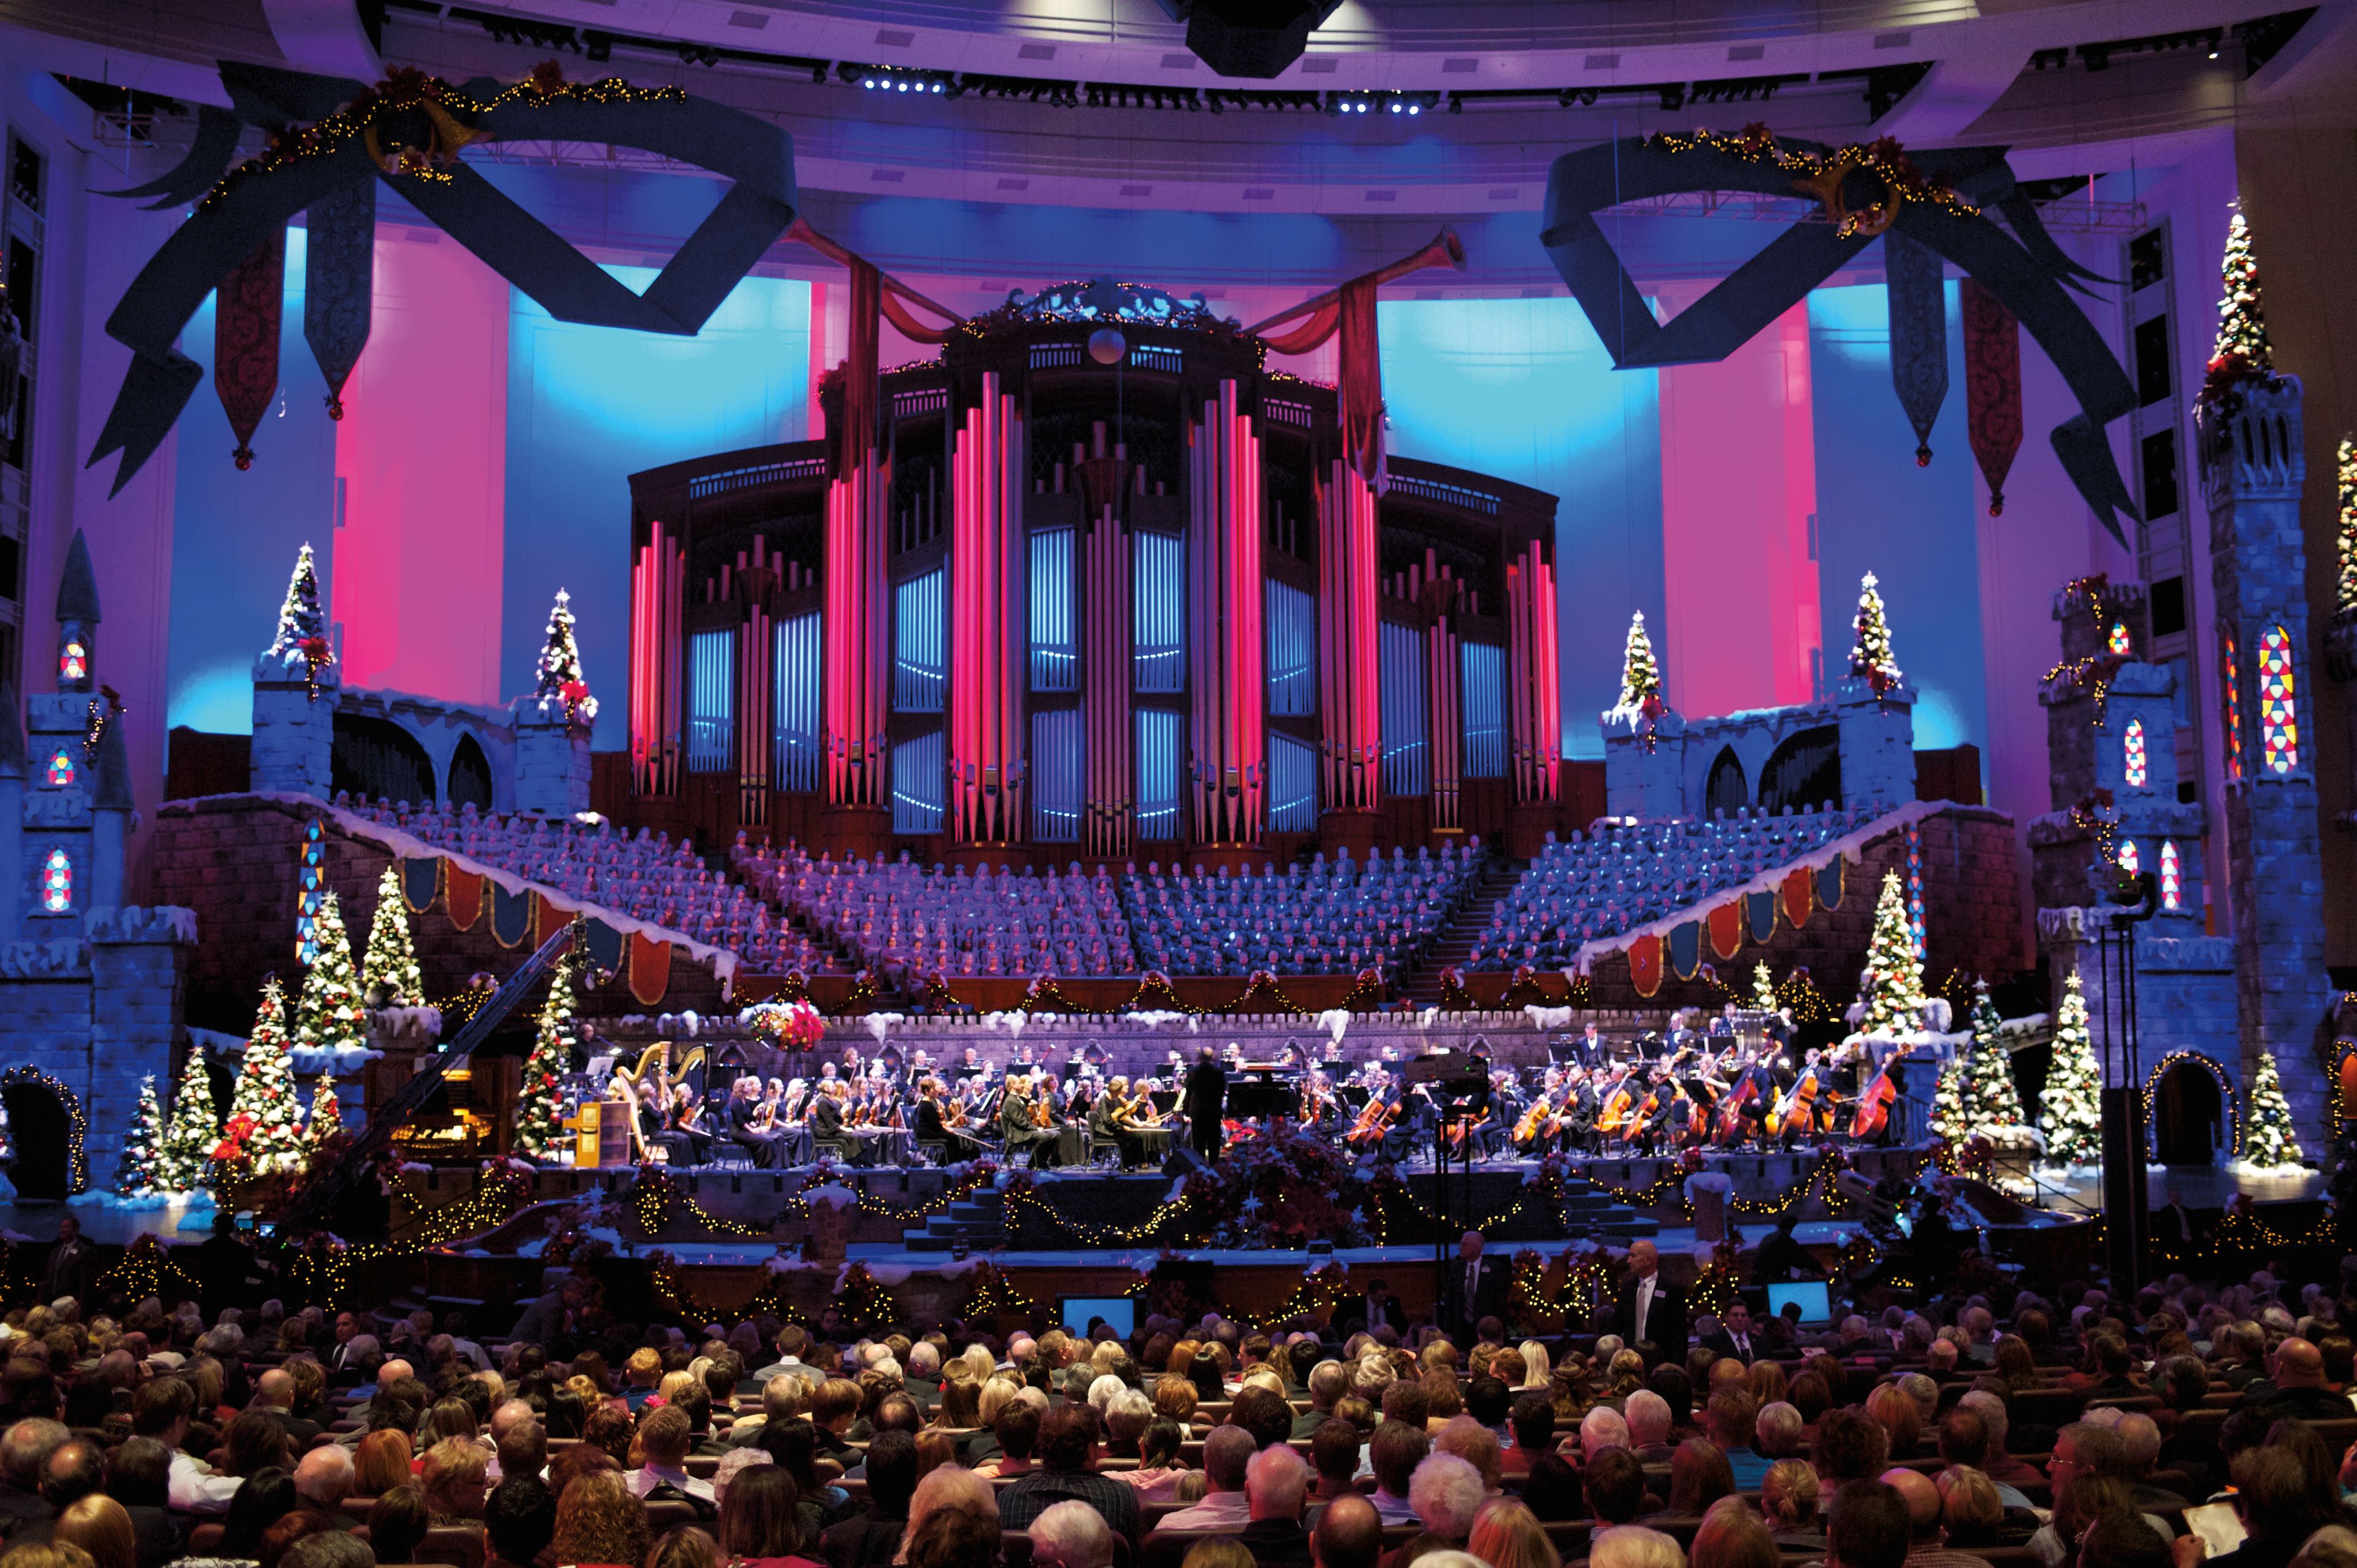 An audience watching the Christmas concert in 2011.